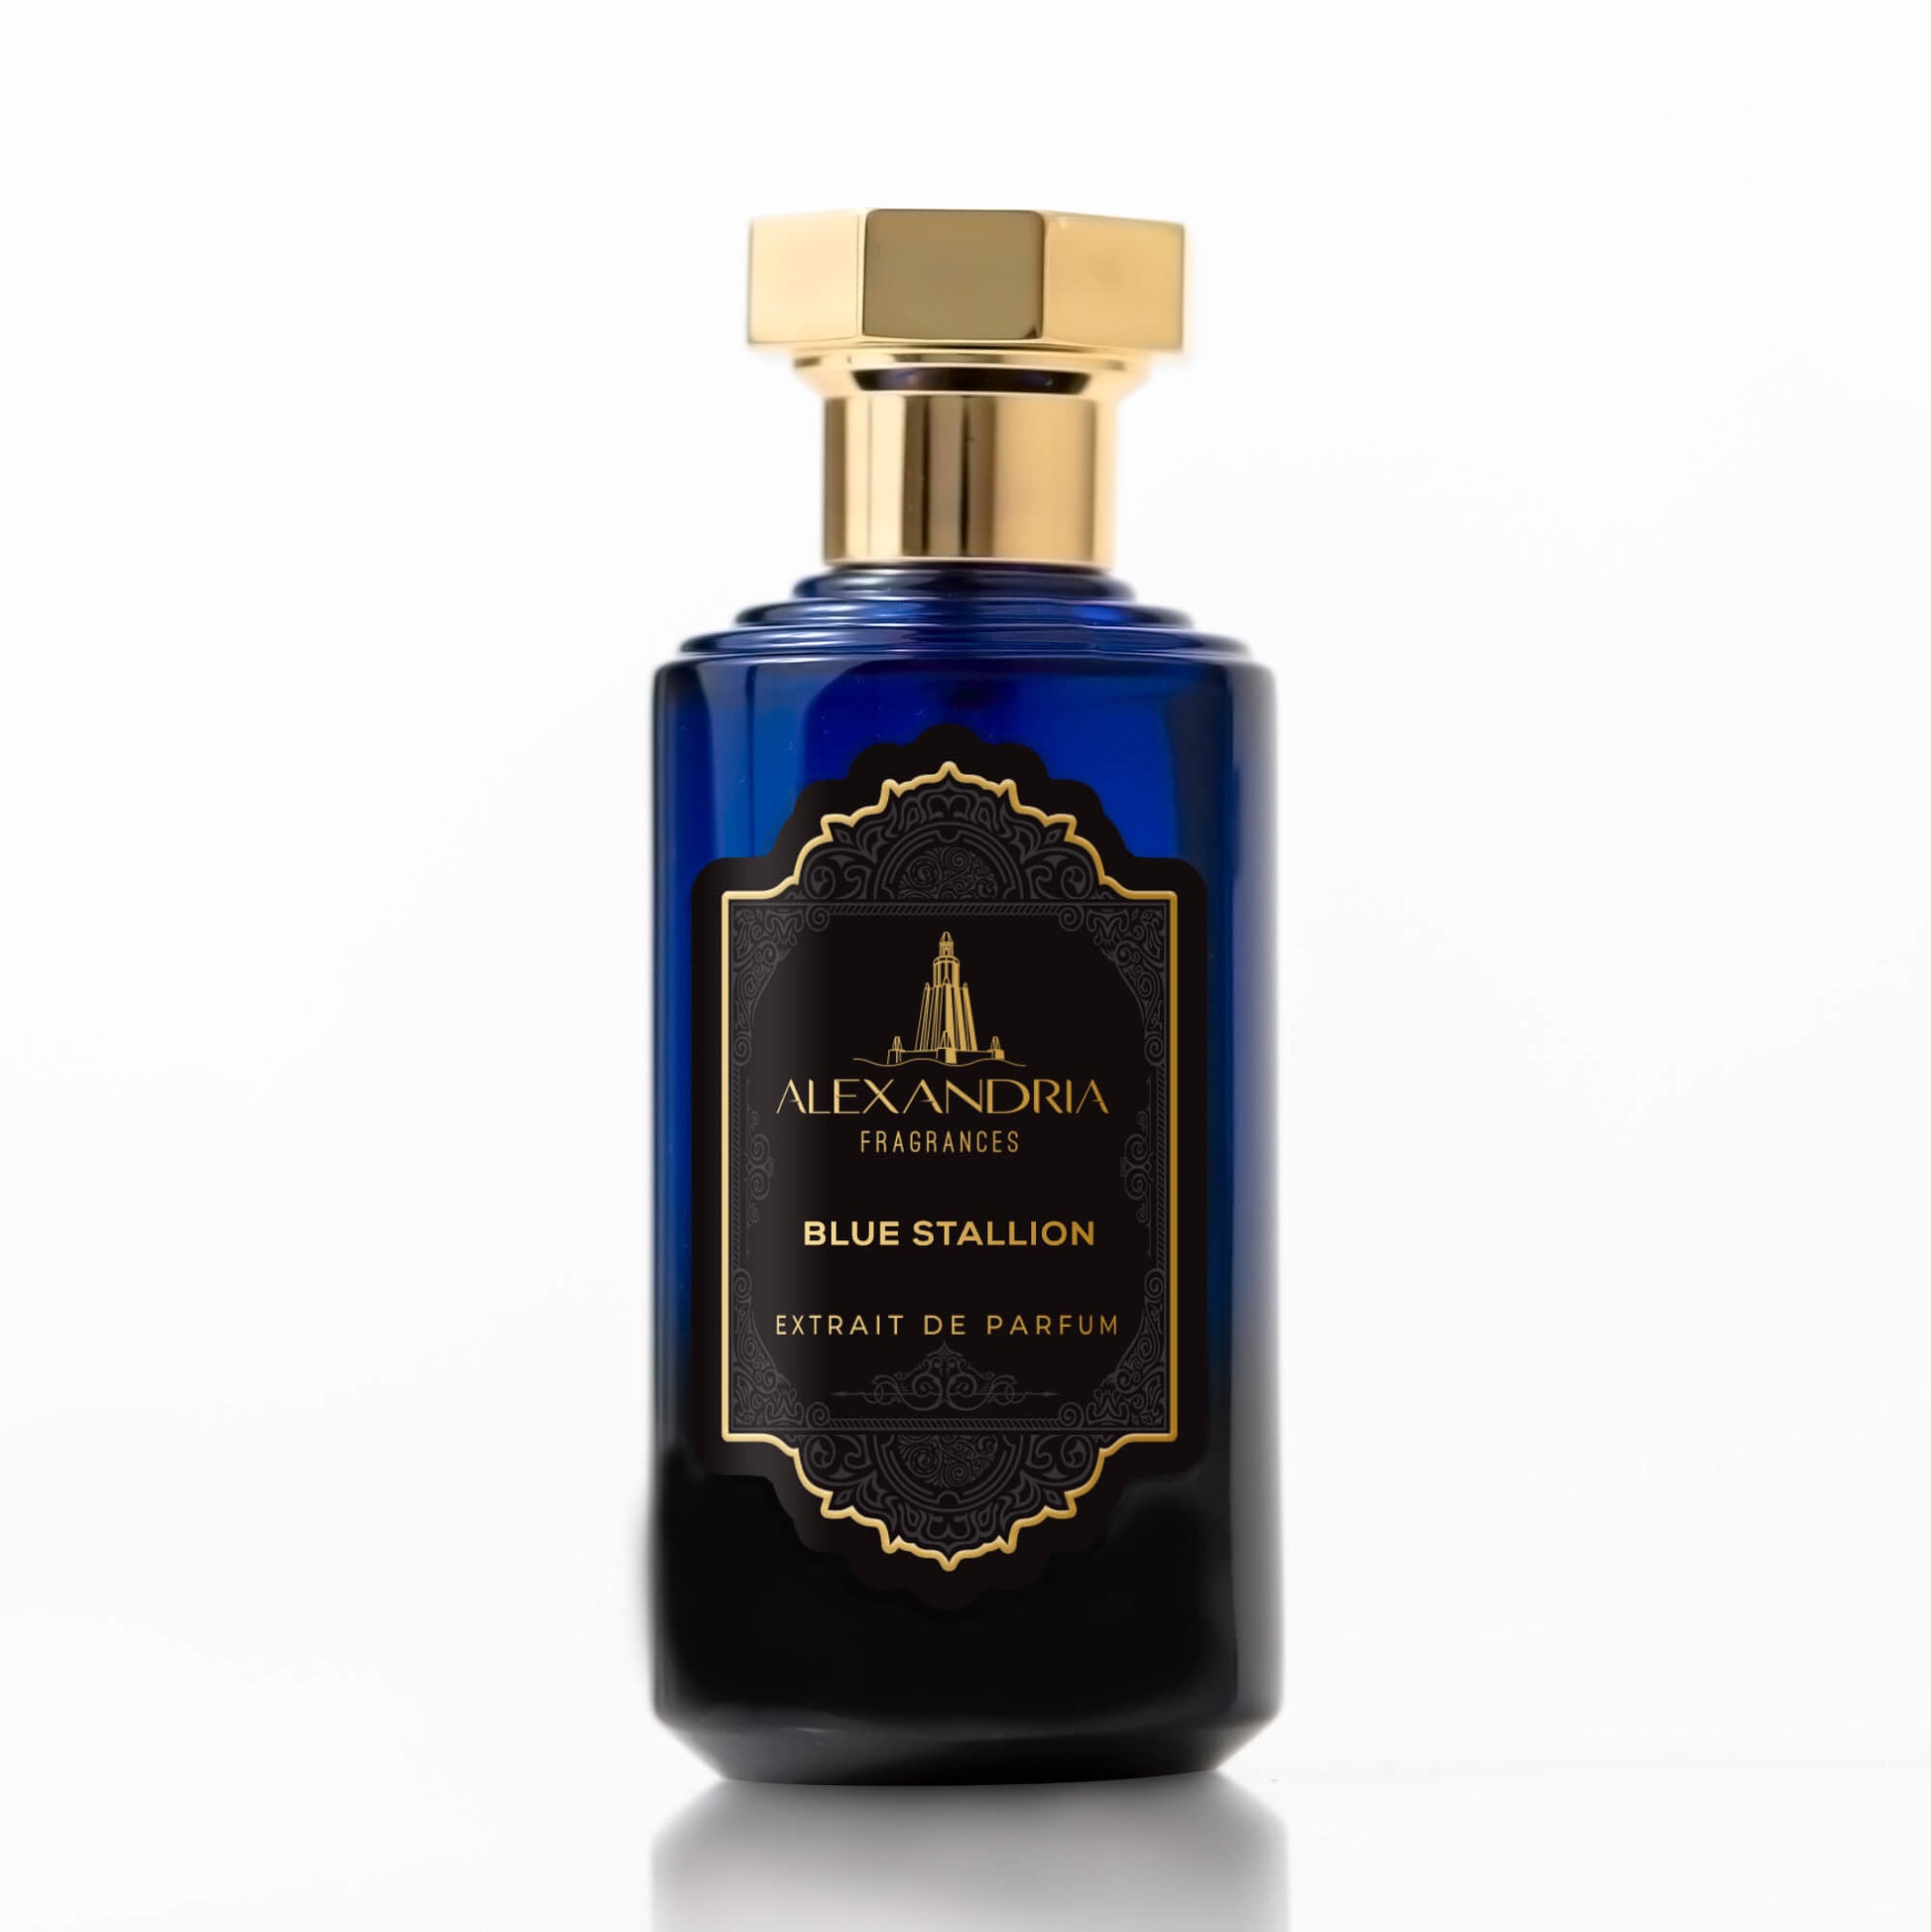 Buy Parfums de Marly Galloway Perfume Samples & Decants Online